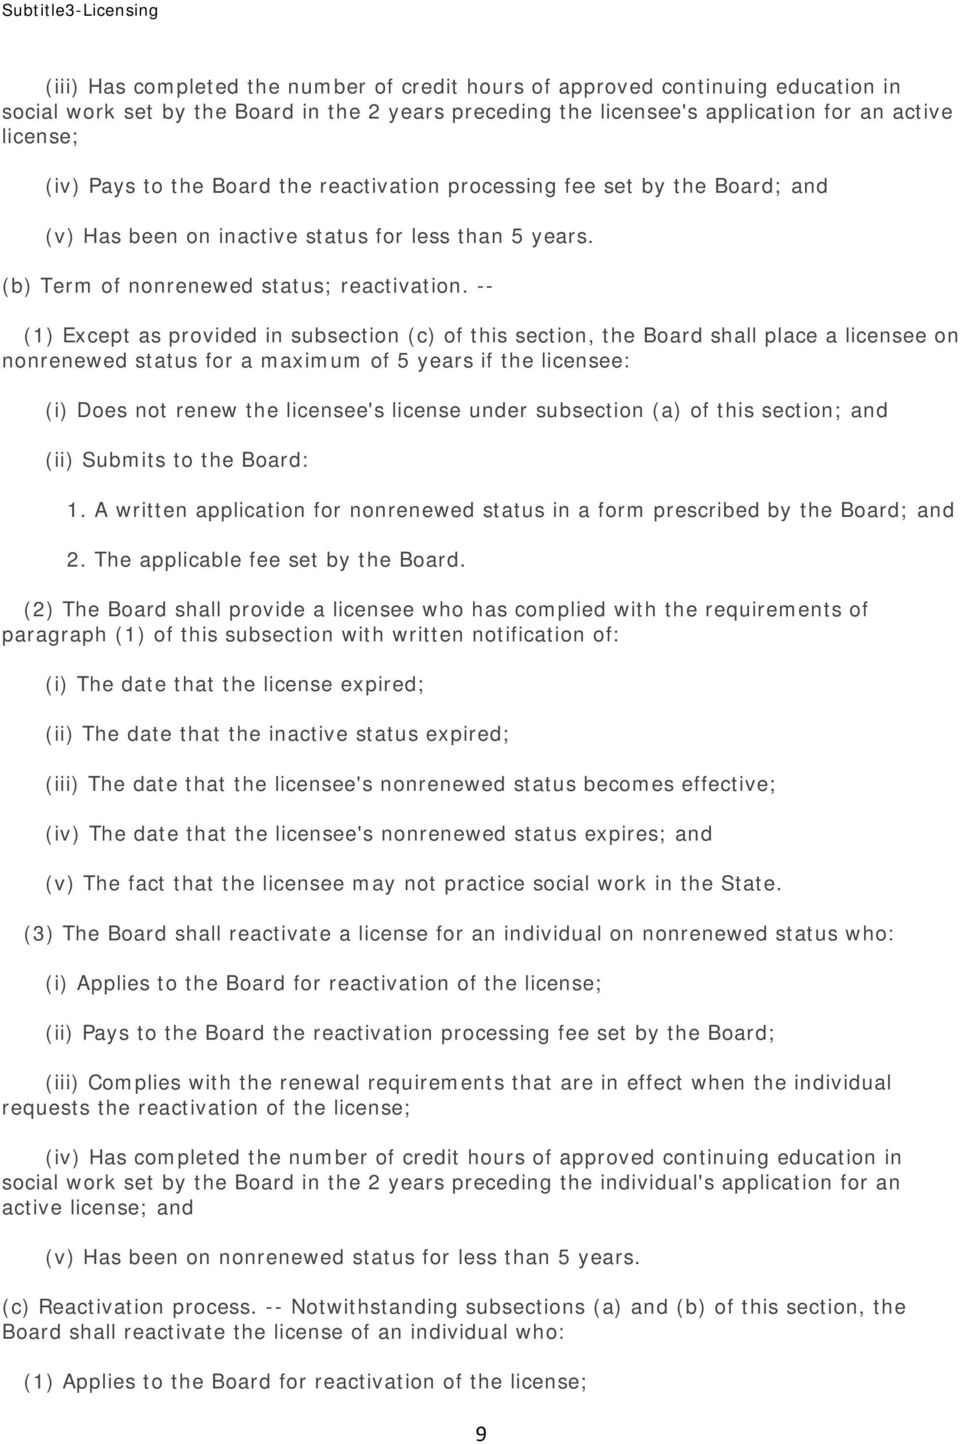 -- (1) Except as provided in subsection (c) of this section, the Board shall place a licensee on nonrenewed status for a maximum of 5 years if the licensee: (i) Does not renew the licensee's license